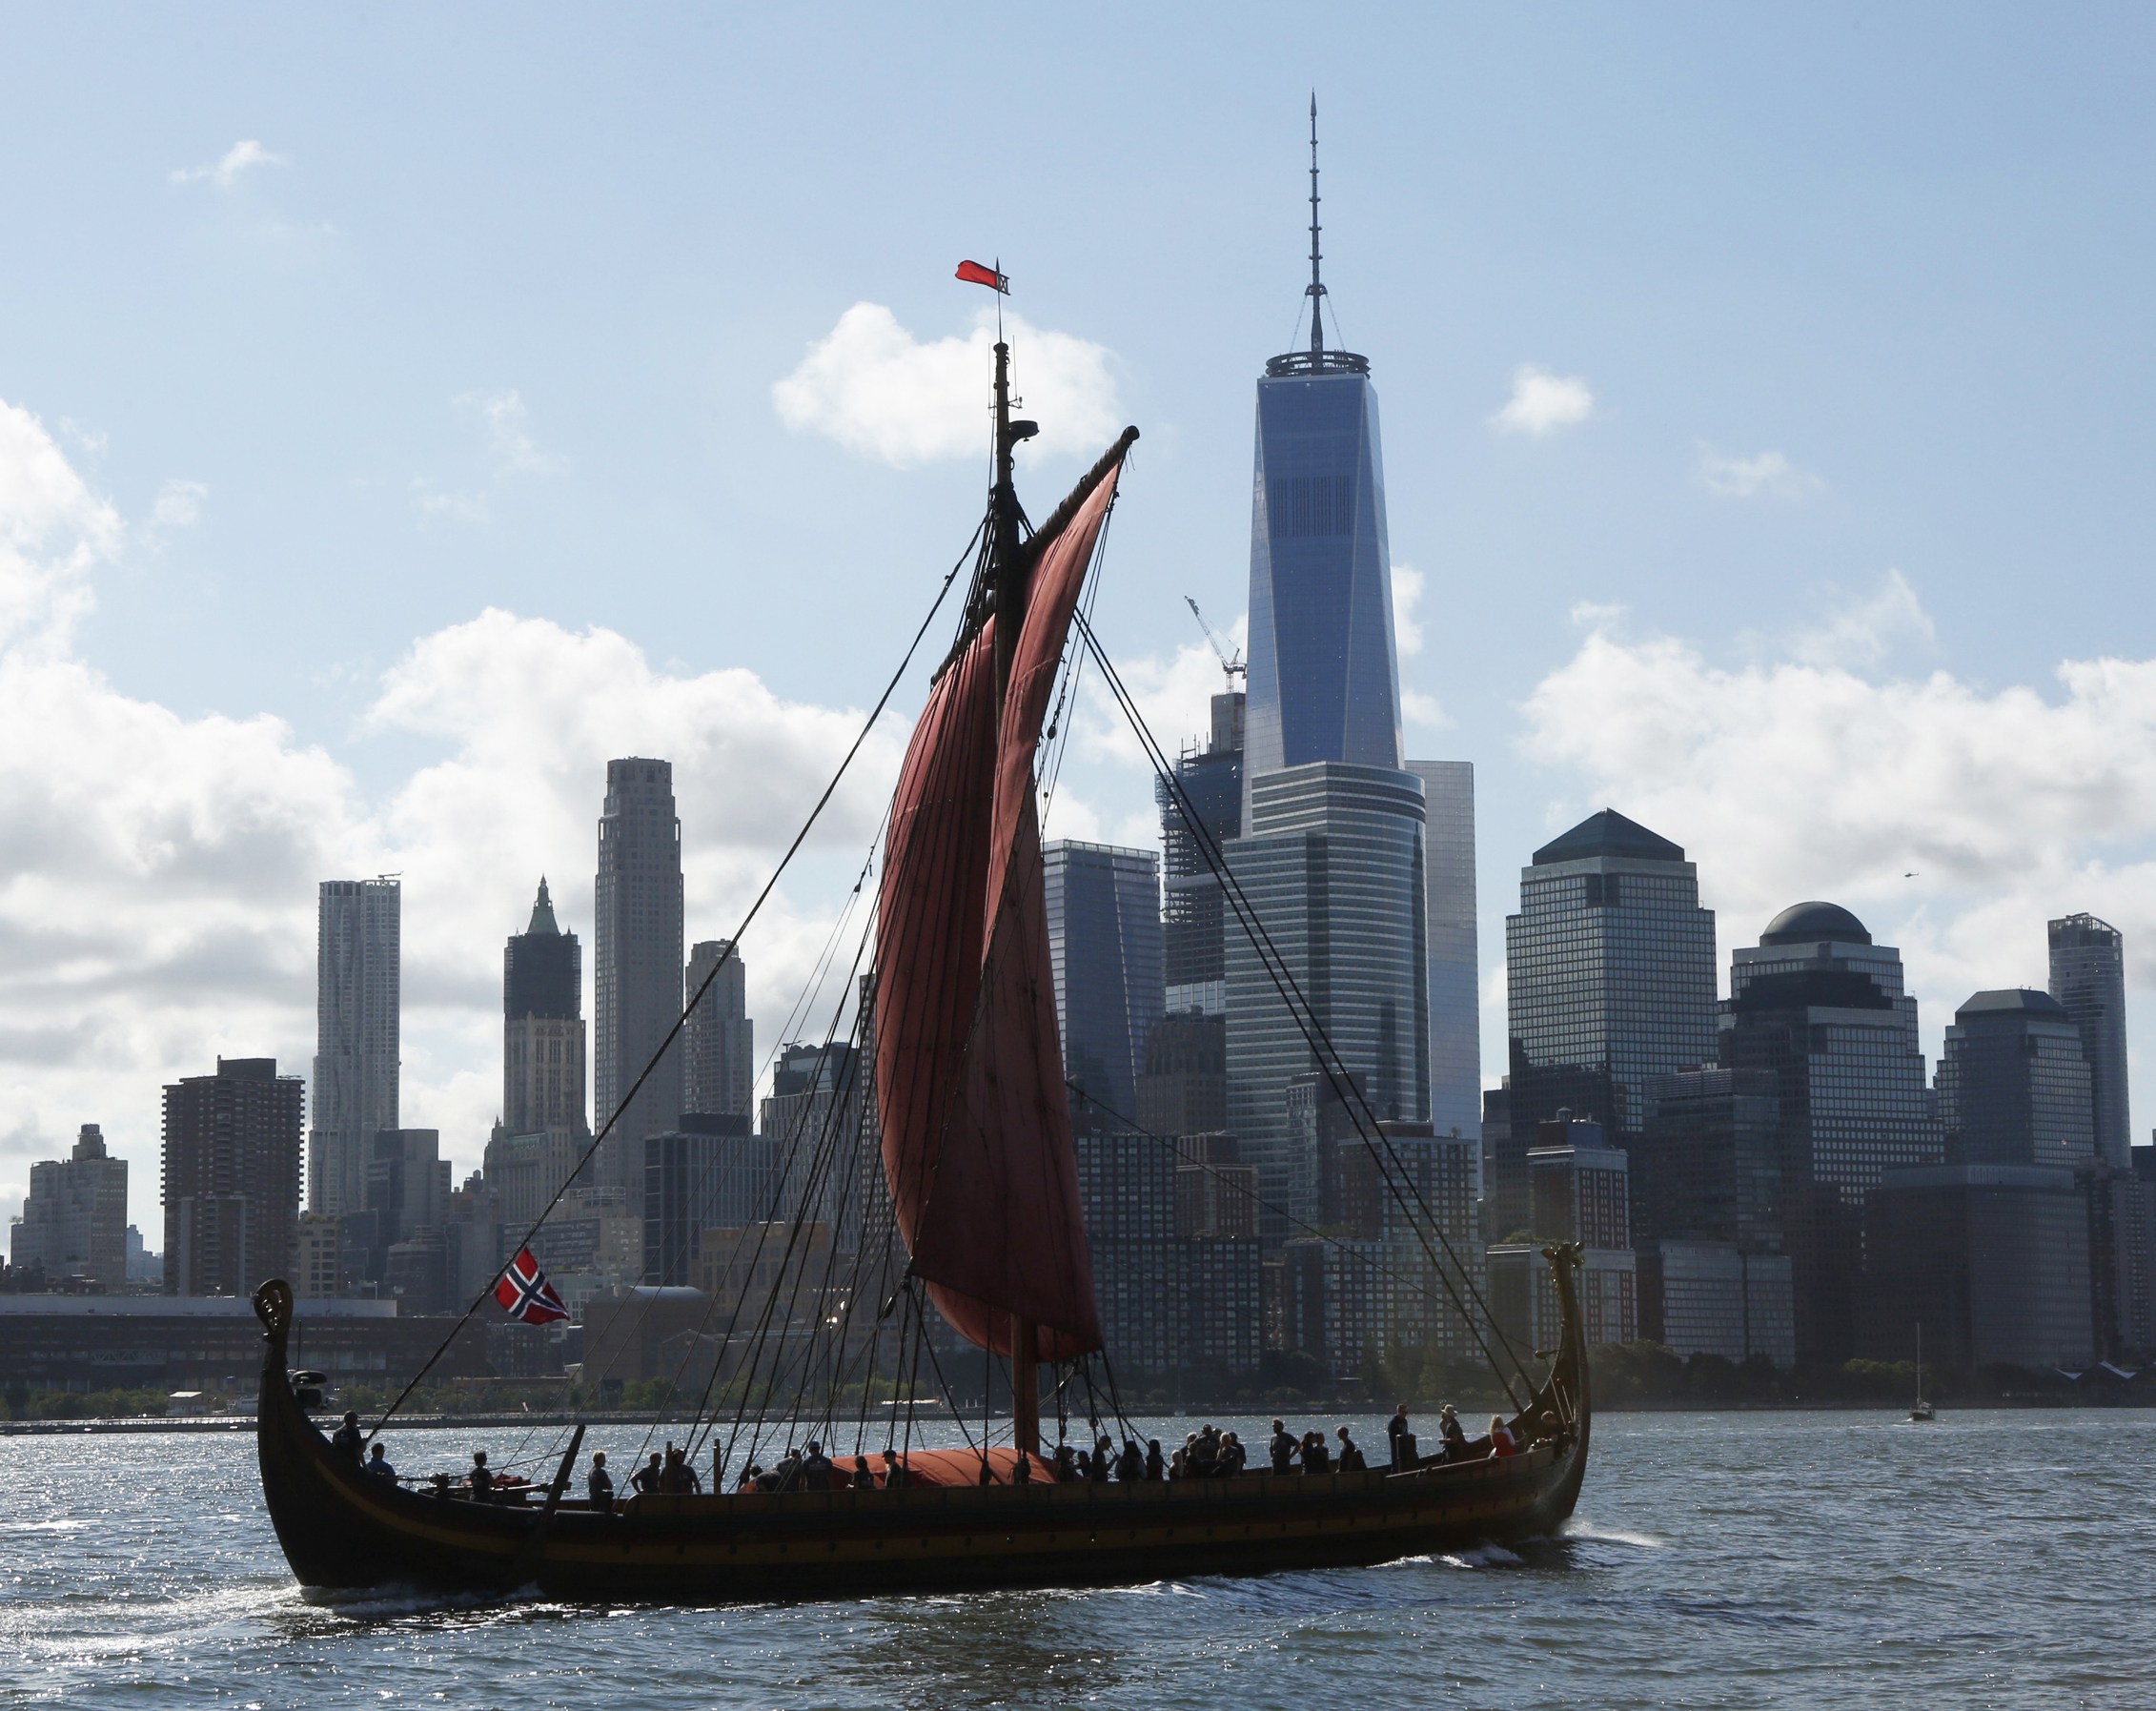 Getty / Thos Robinson It may be the world’s largest Viking ship, but the 79-foot mast of the Draken Harald Harfagre still can’t compare to the mast atop One World Trade Center.